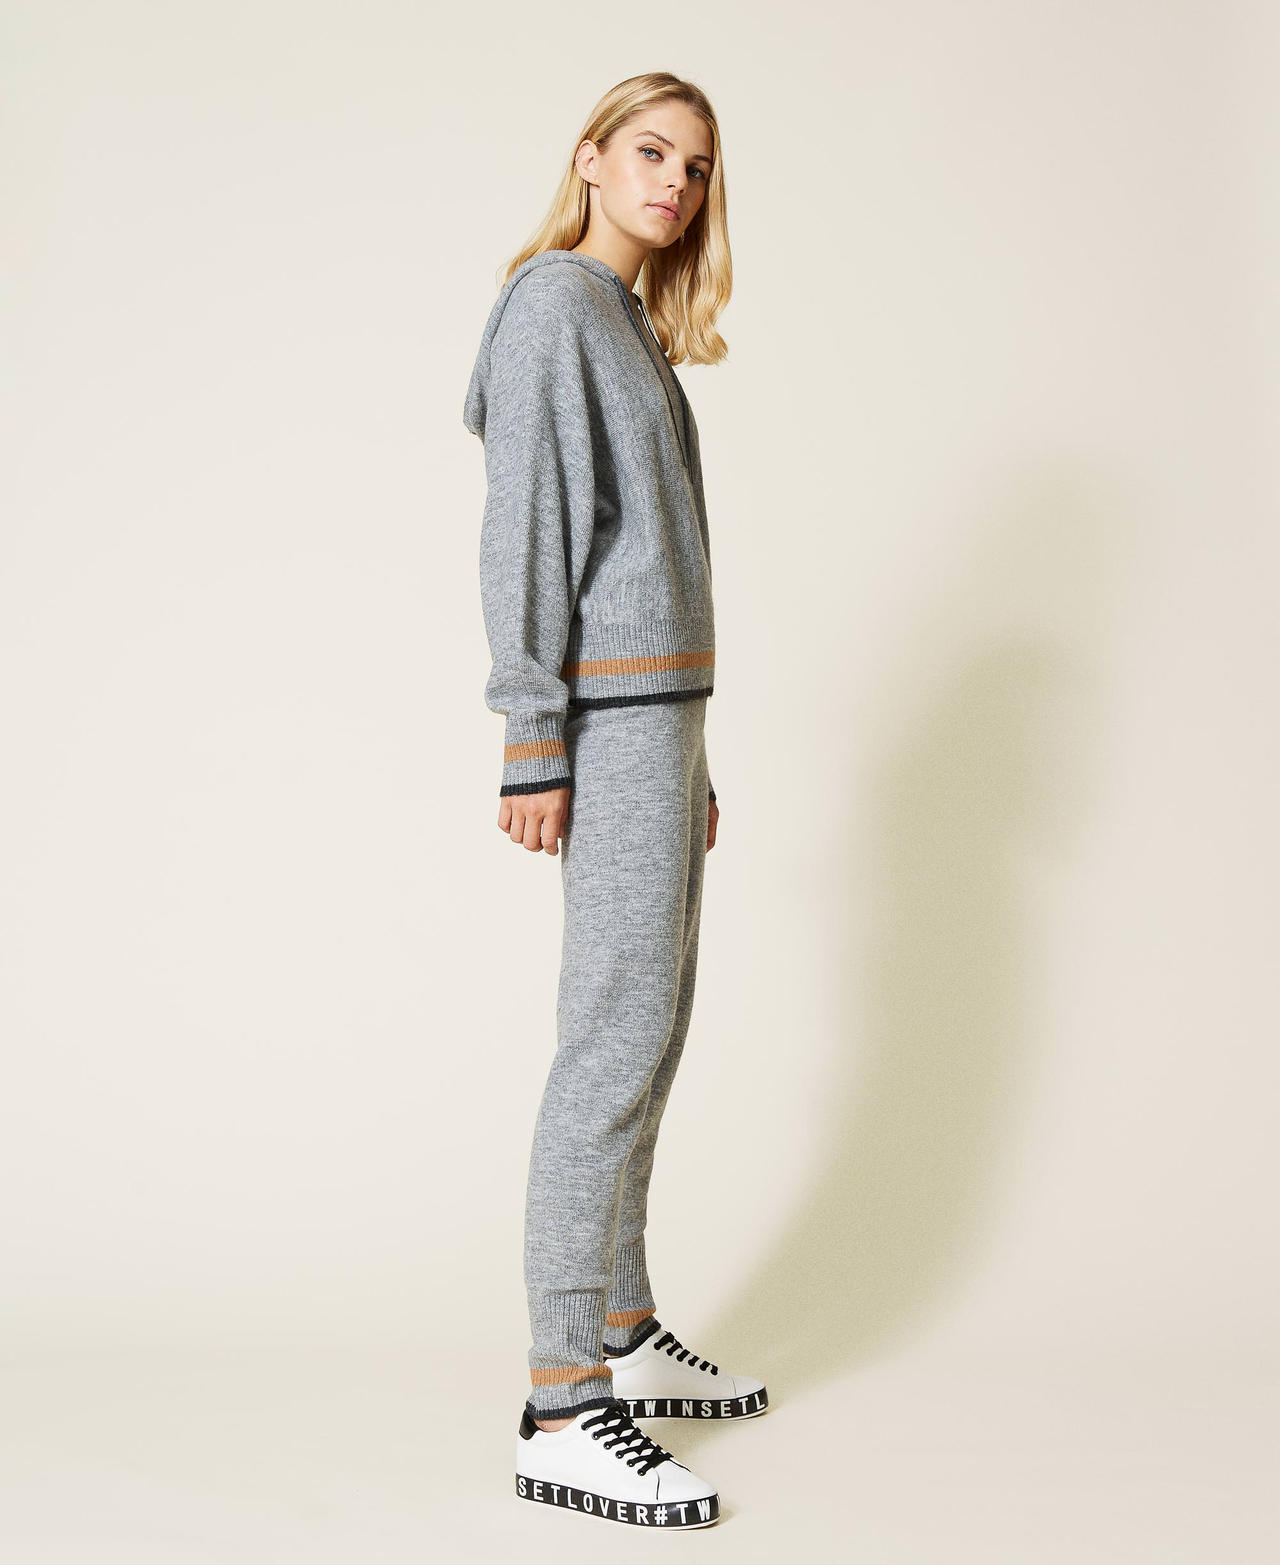 Hooded jumper and joggers Grey Marl / Anthracite / Desert Light Multicolour Woman 212LI3QGG-03